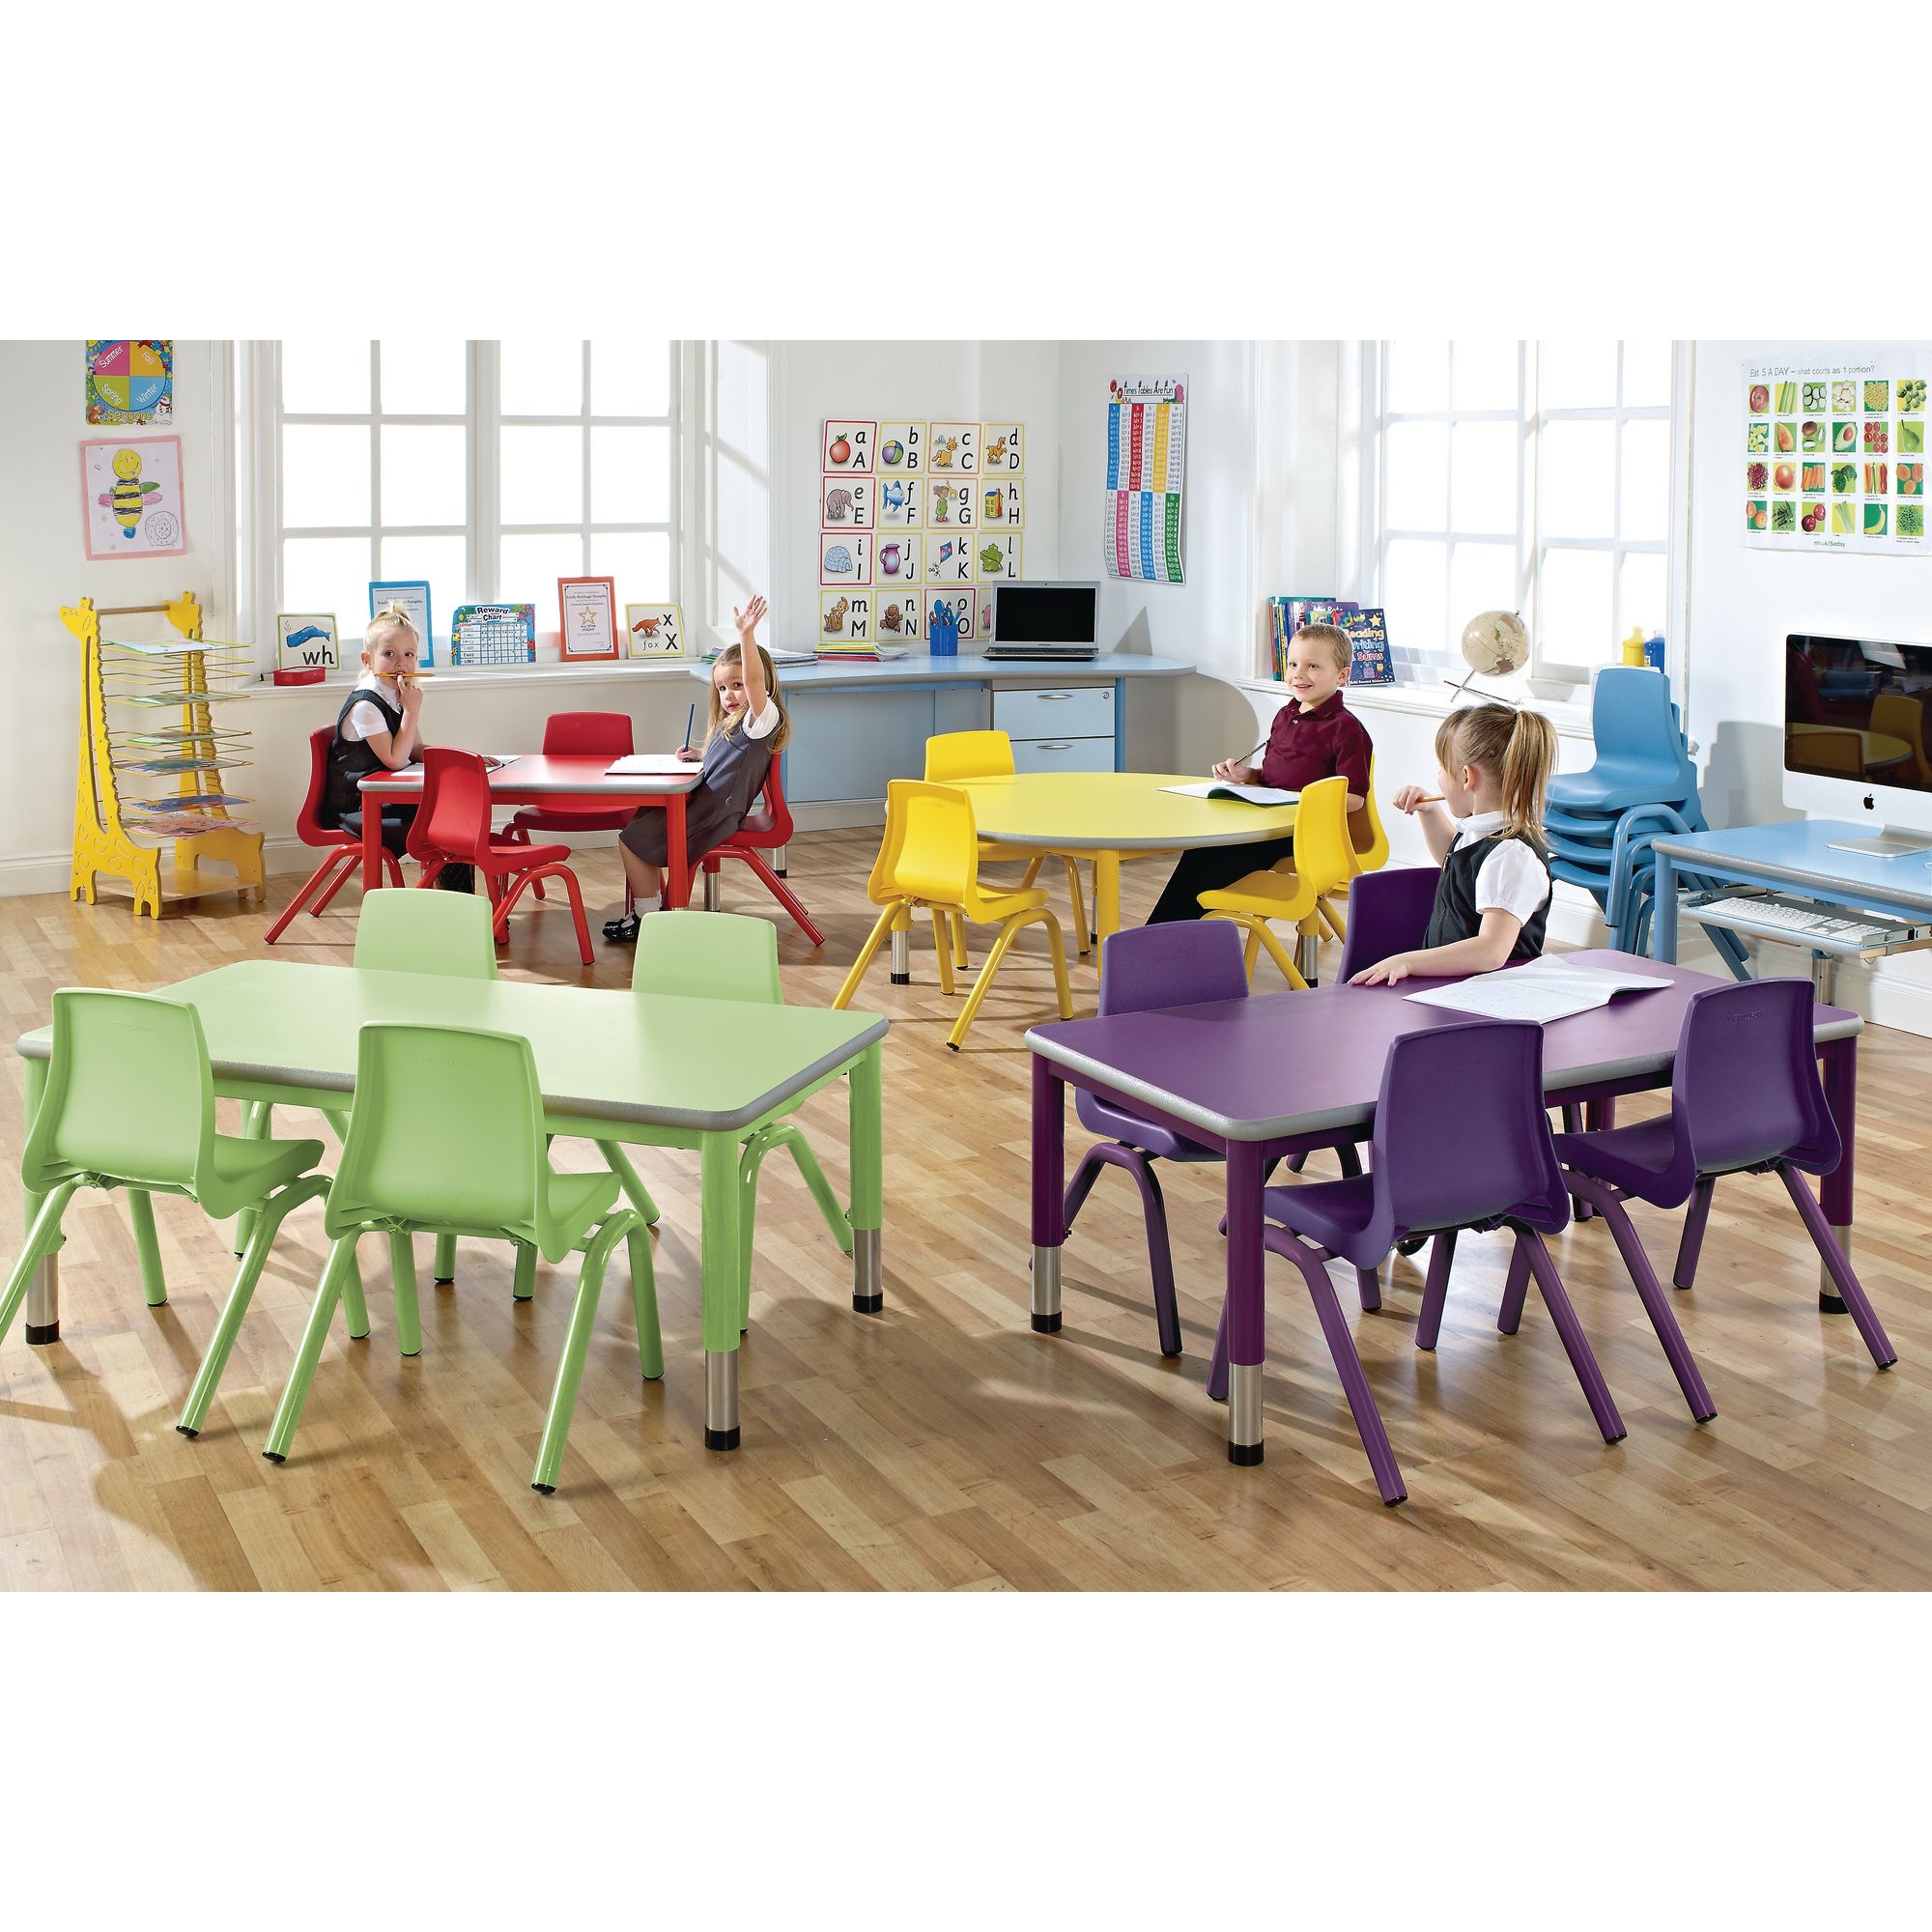 Harlequin Rectangular Height Adjustable Steel Classroom Pack: Table and 4 Chairs - 900 x 600 x 460mm - Soft Blue